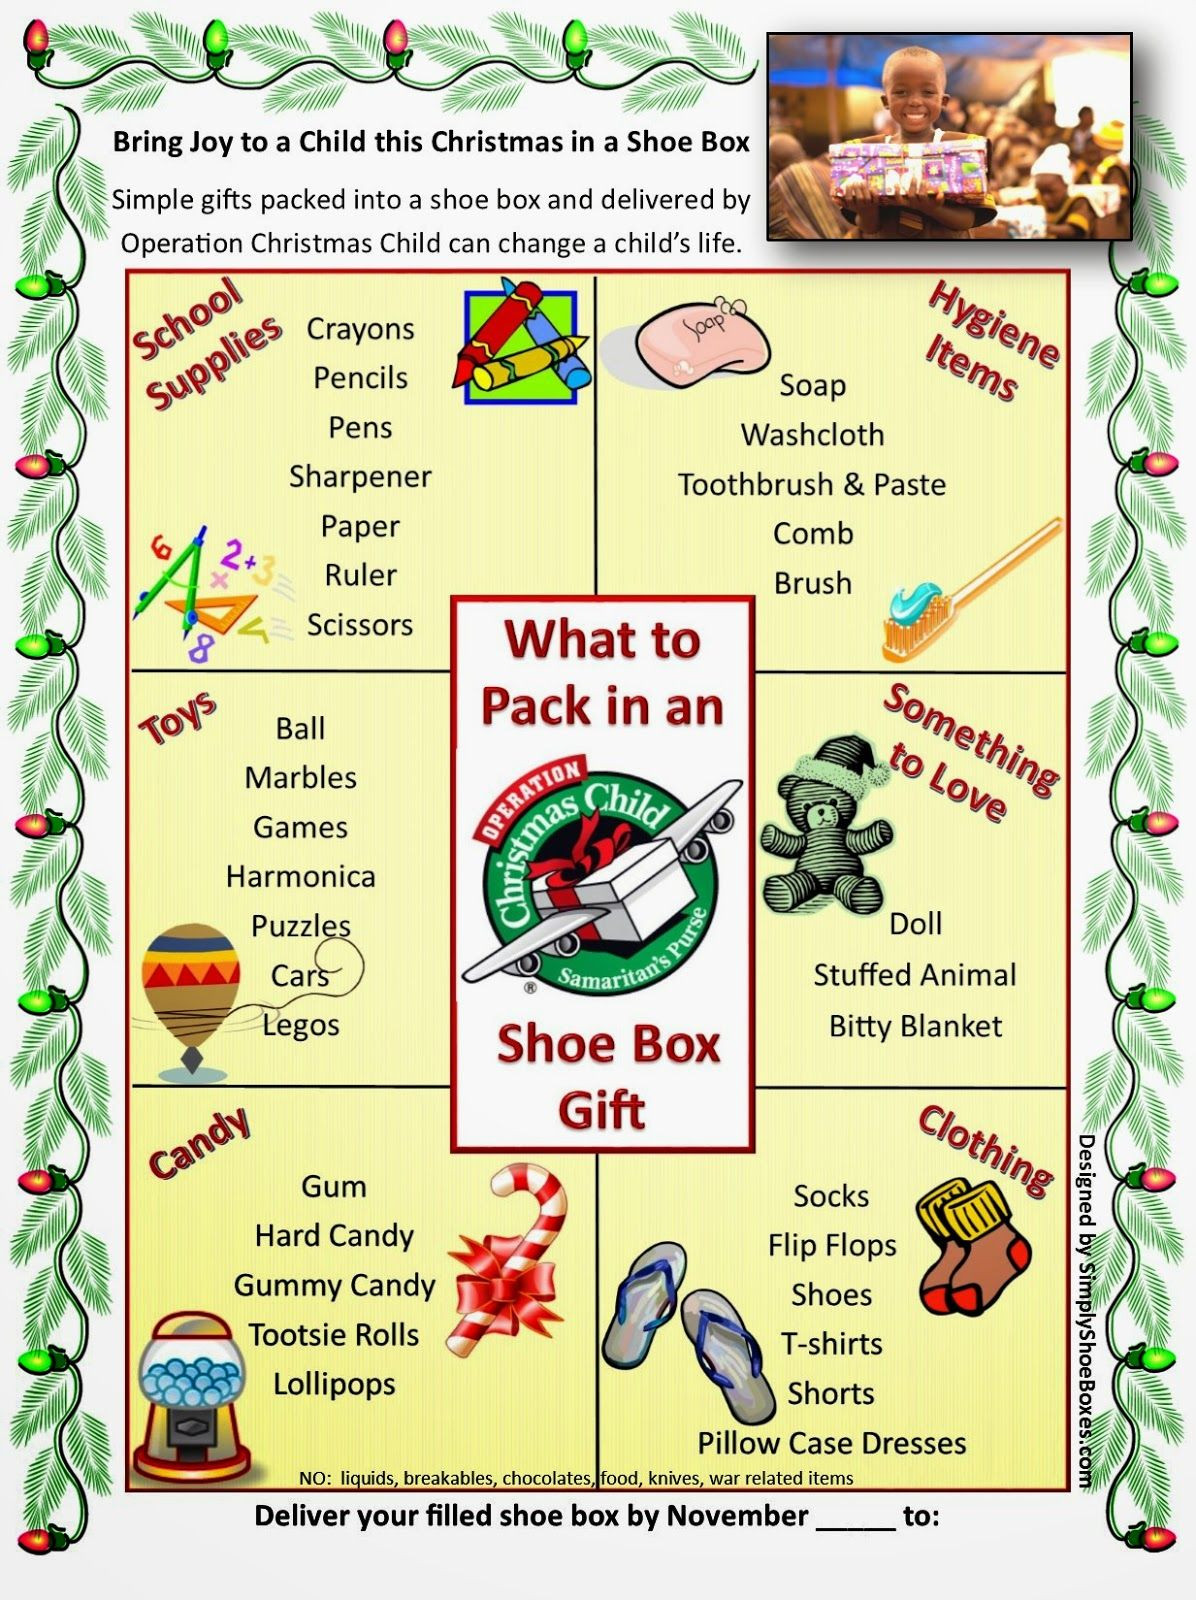 Operation Christmas Child Gift Ideas
 What to Pack in an Operation Christmas Child Shoe Box